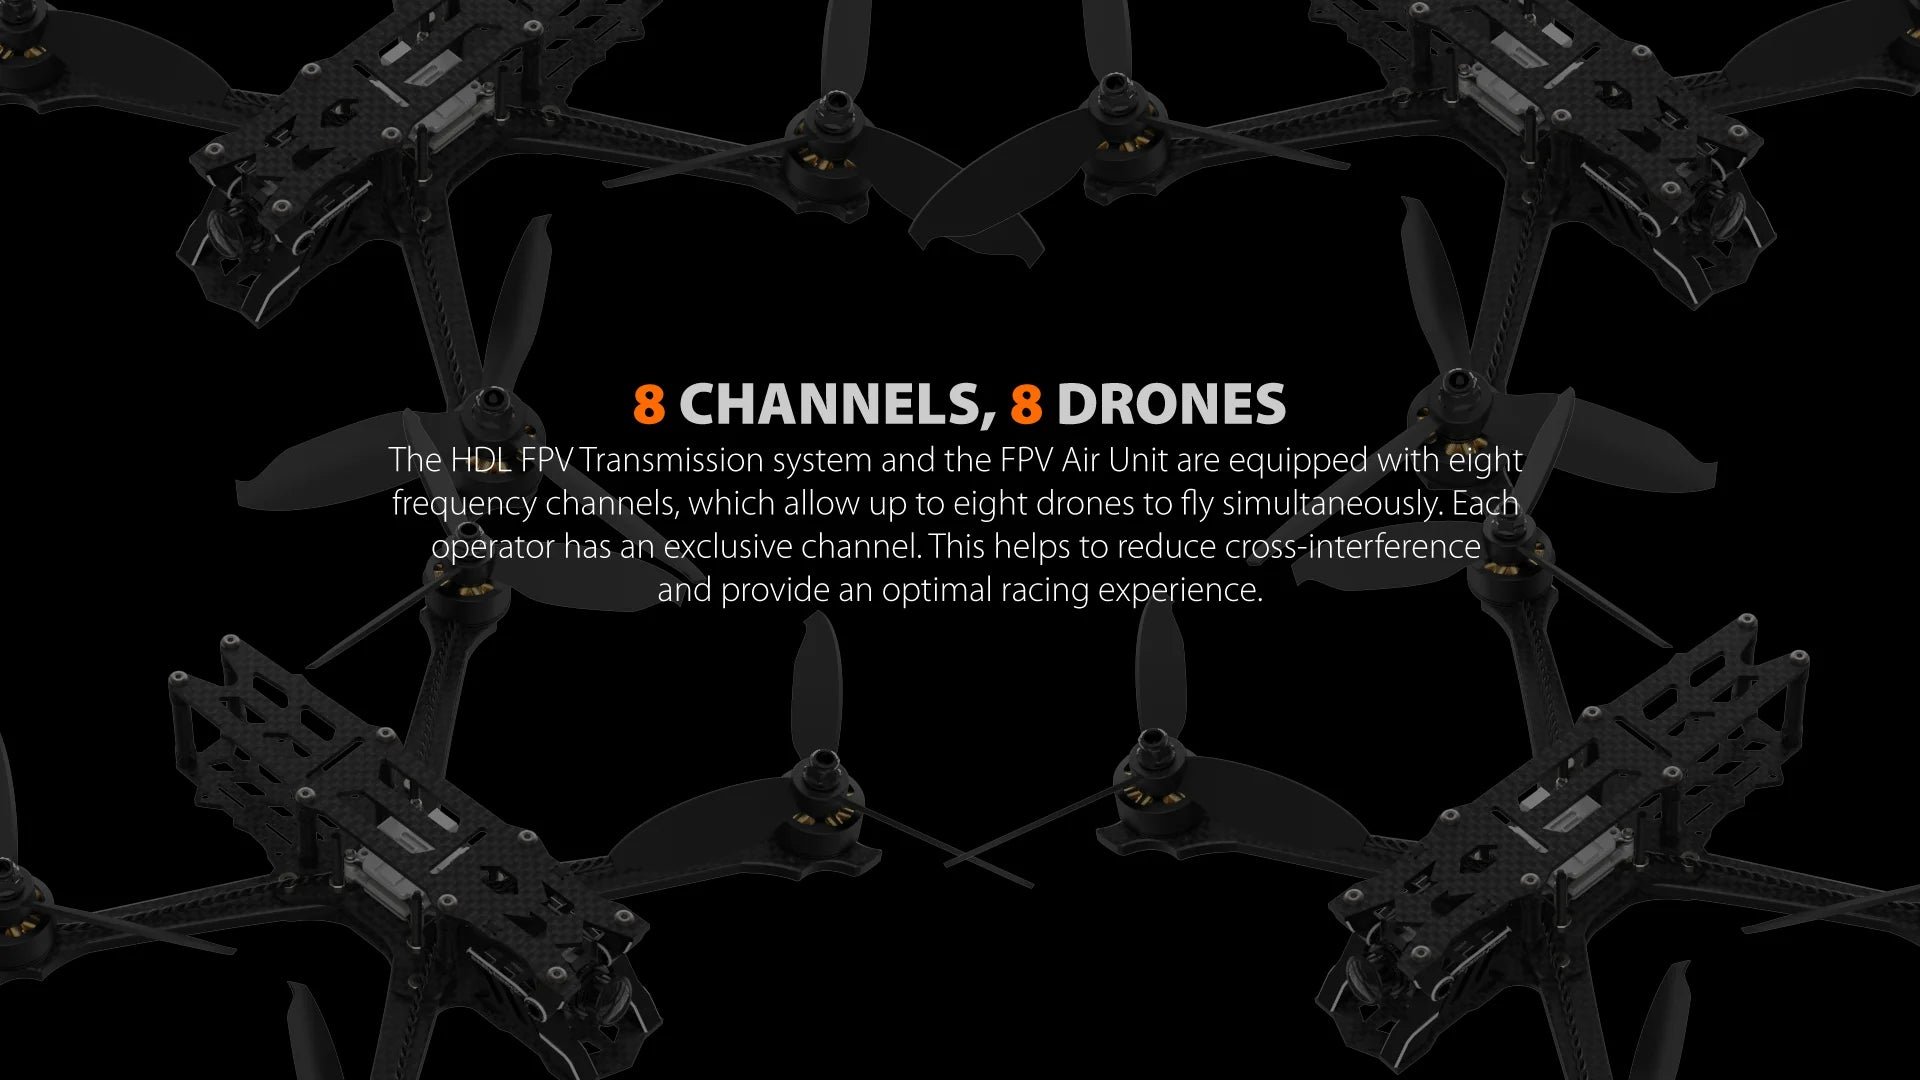 8 CHANNELS, 8 DRONES The HDL FPV Transmission system and